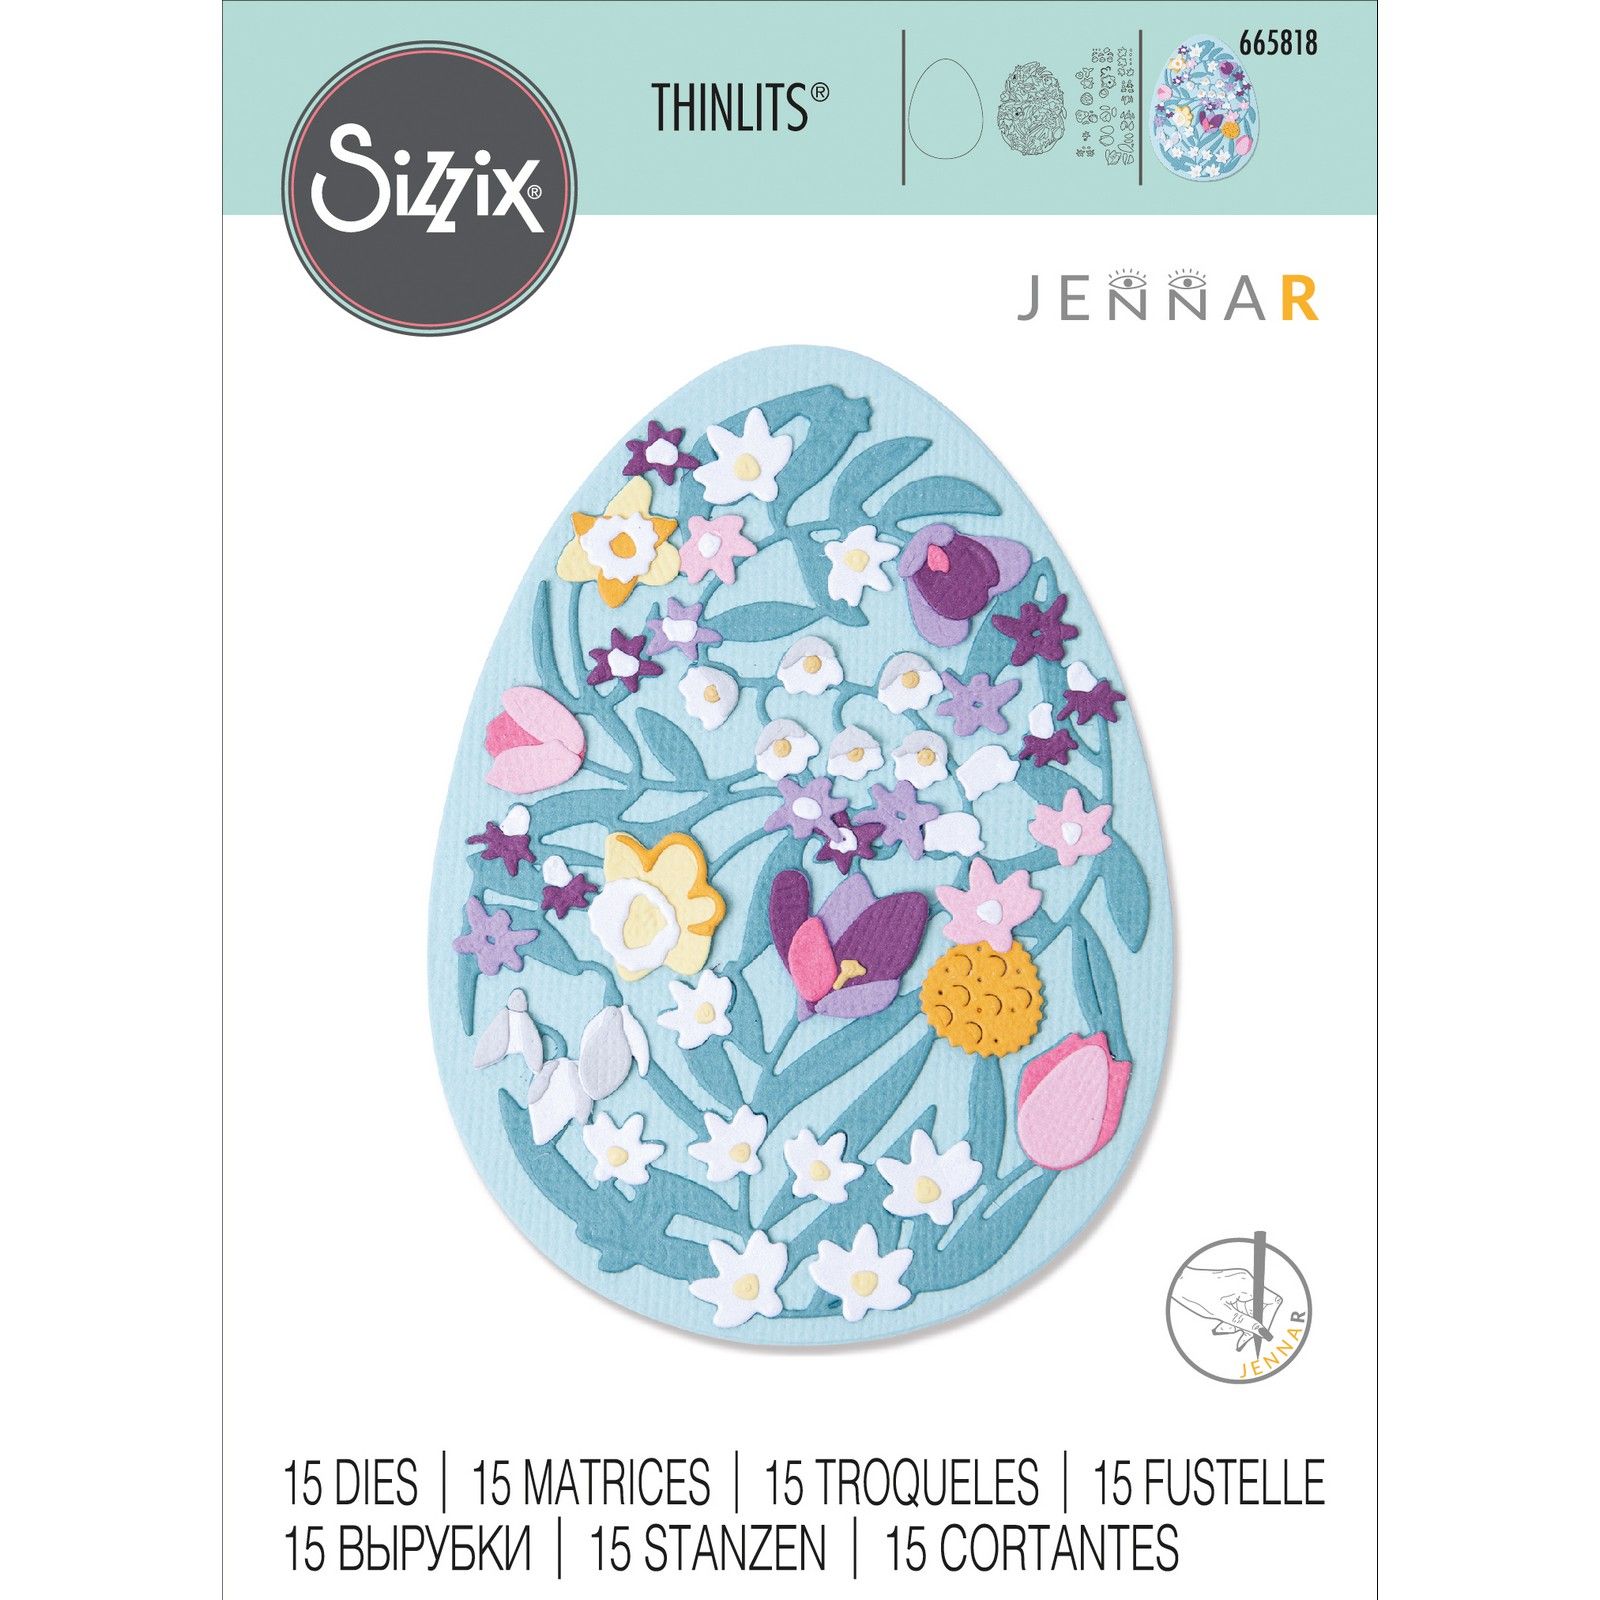 Sizzix • Thinlits Die Set 15PK Intricate Floral Easter Egg by Jenna Rushforth